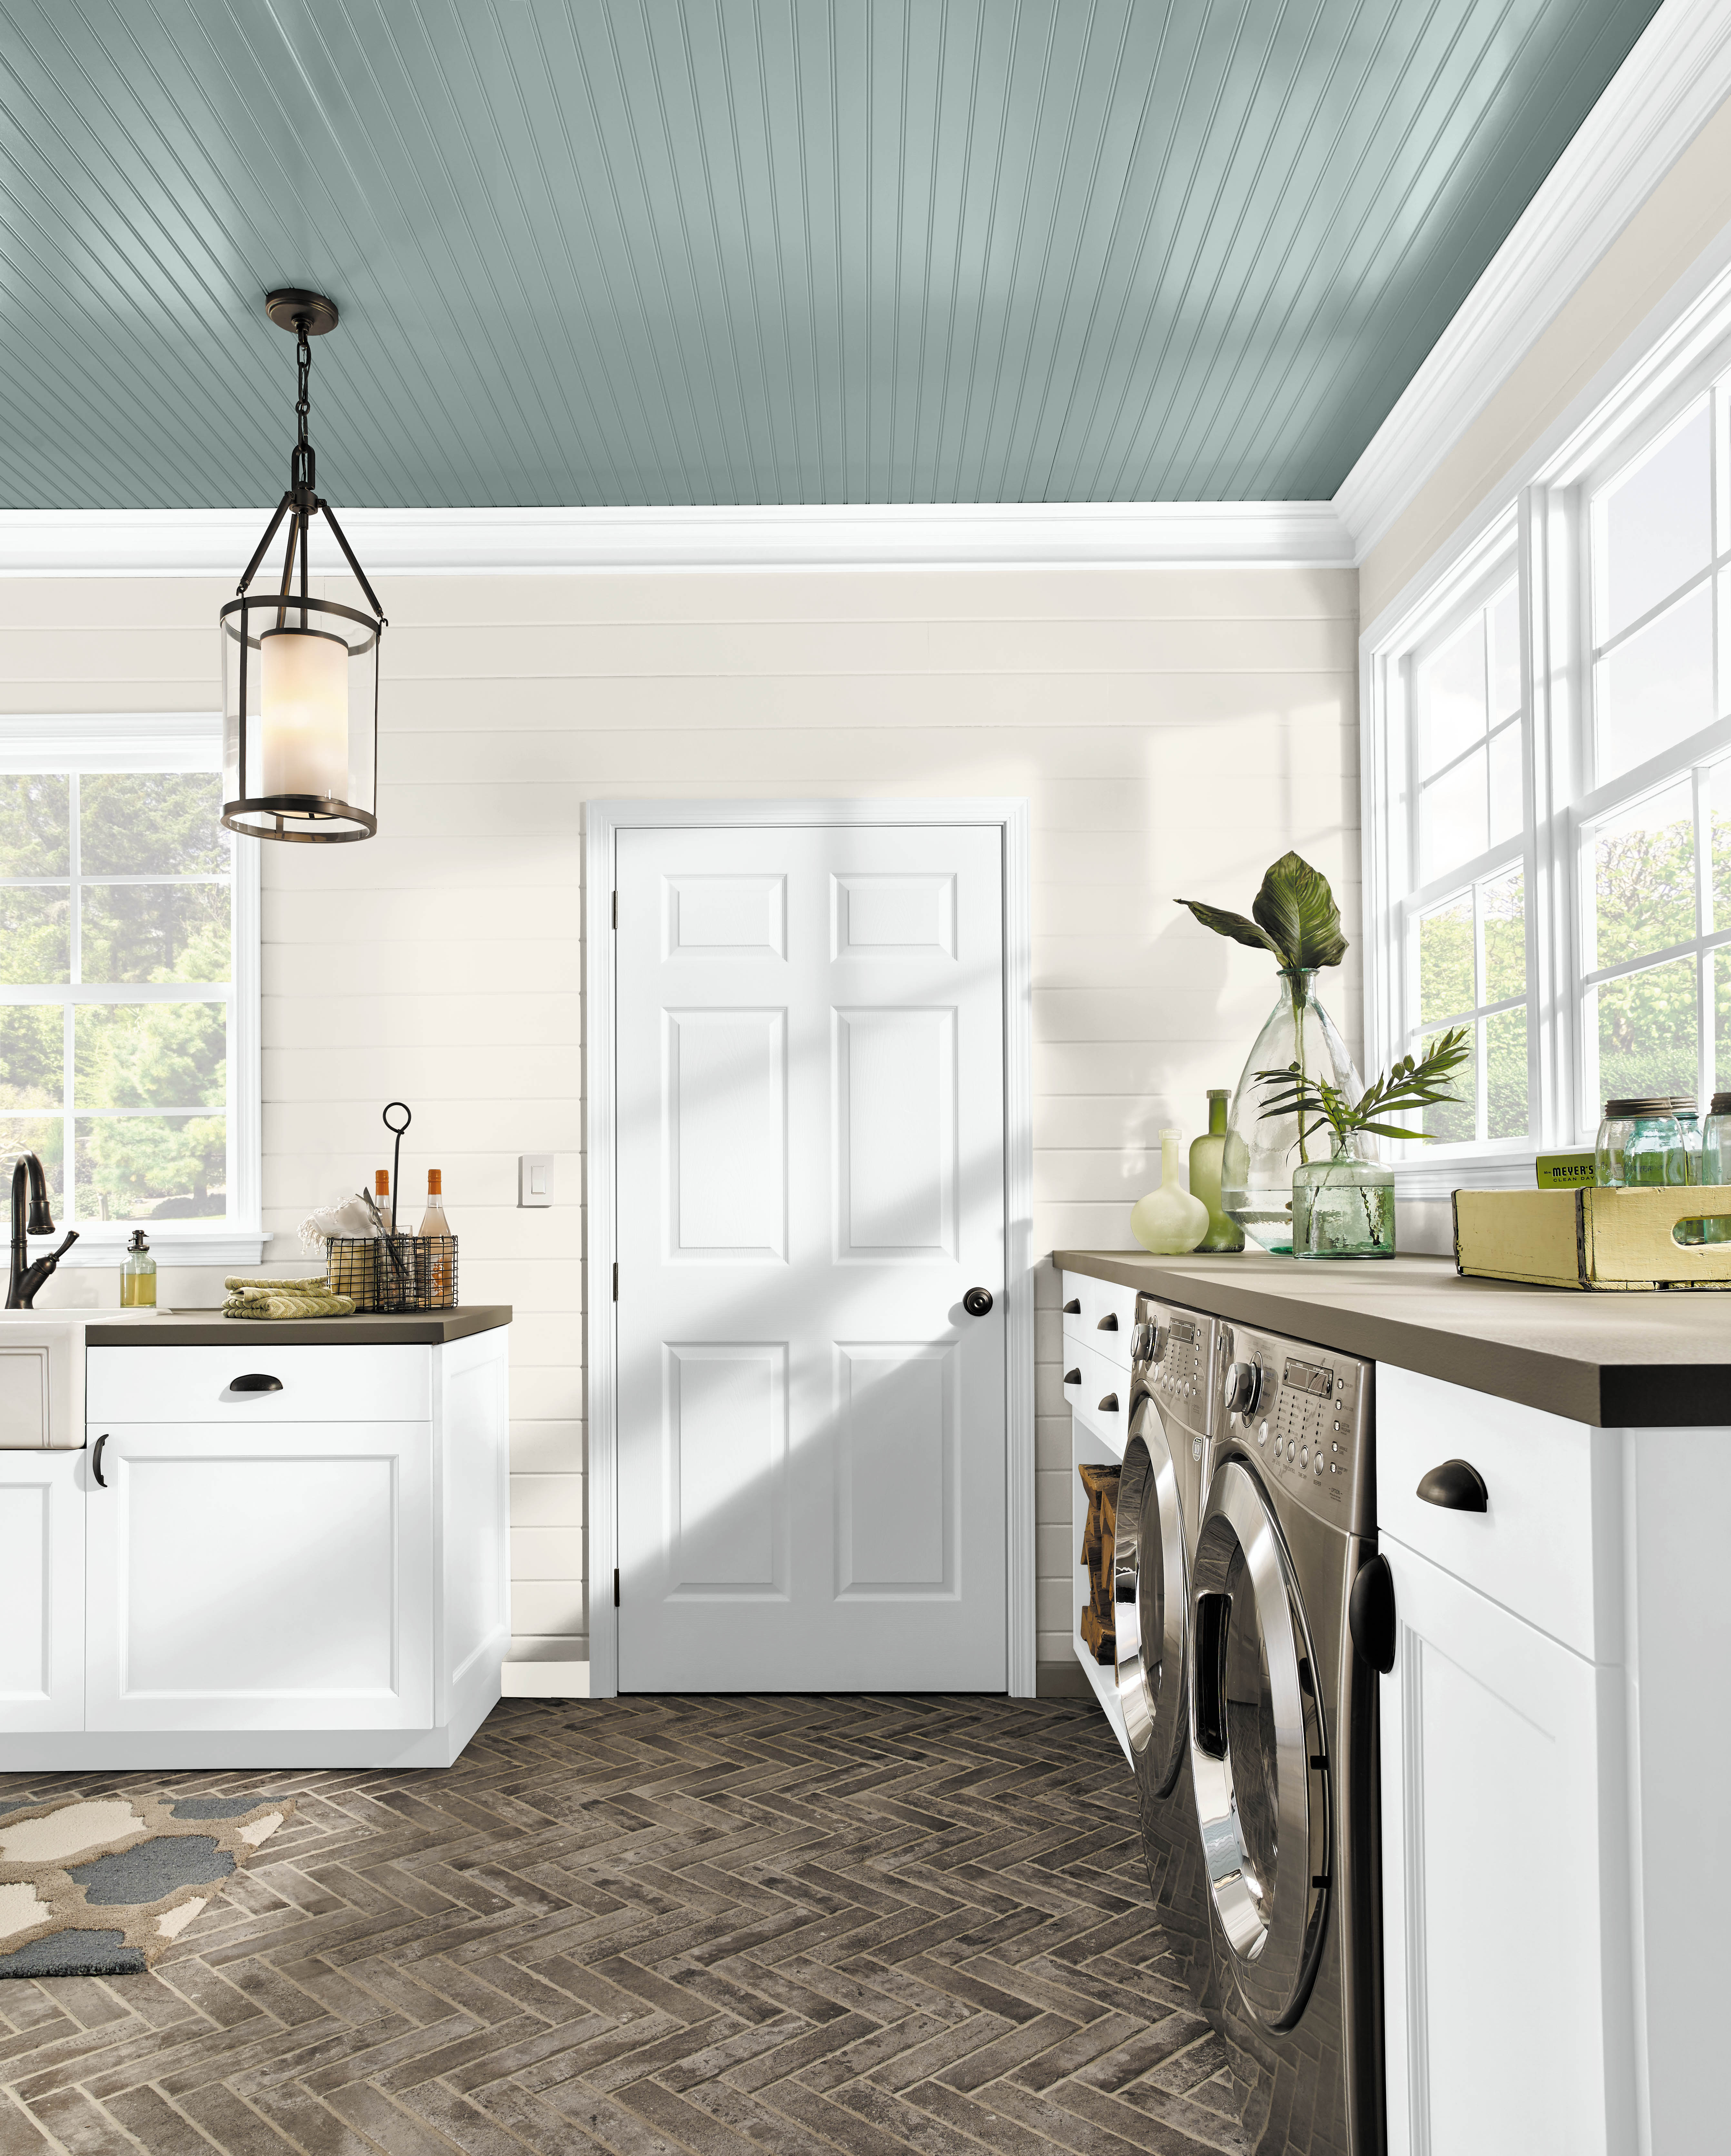 A bright and spacious laundry room with white walls and the ceiling painted in a dusty blue green colour